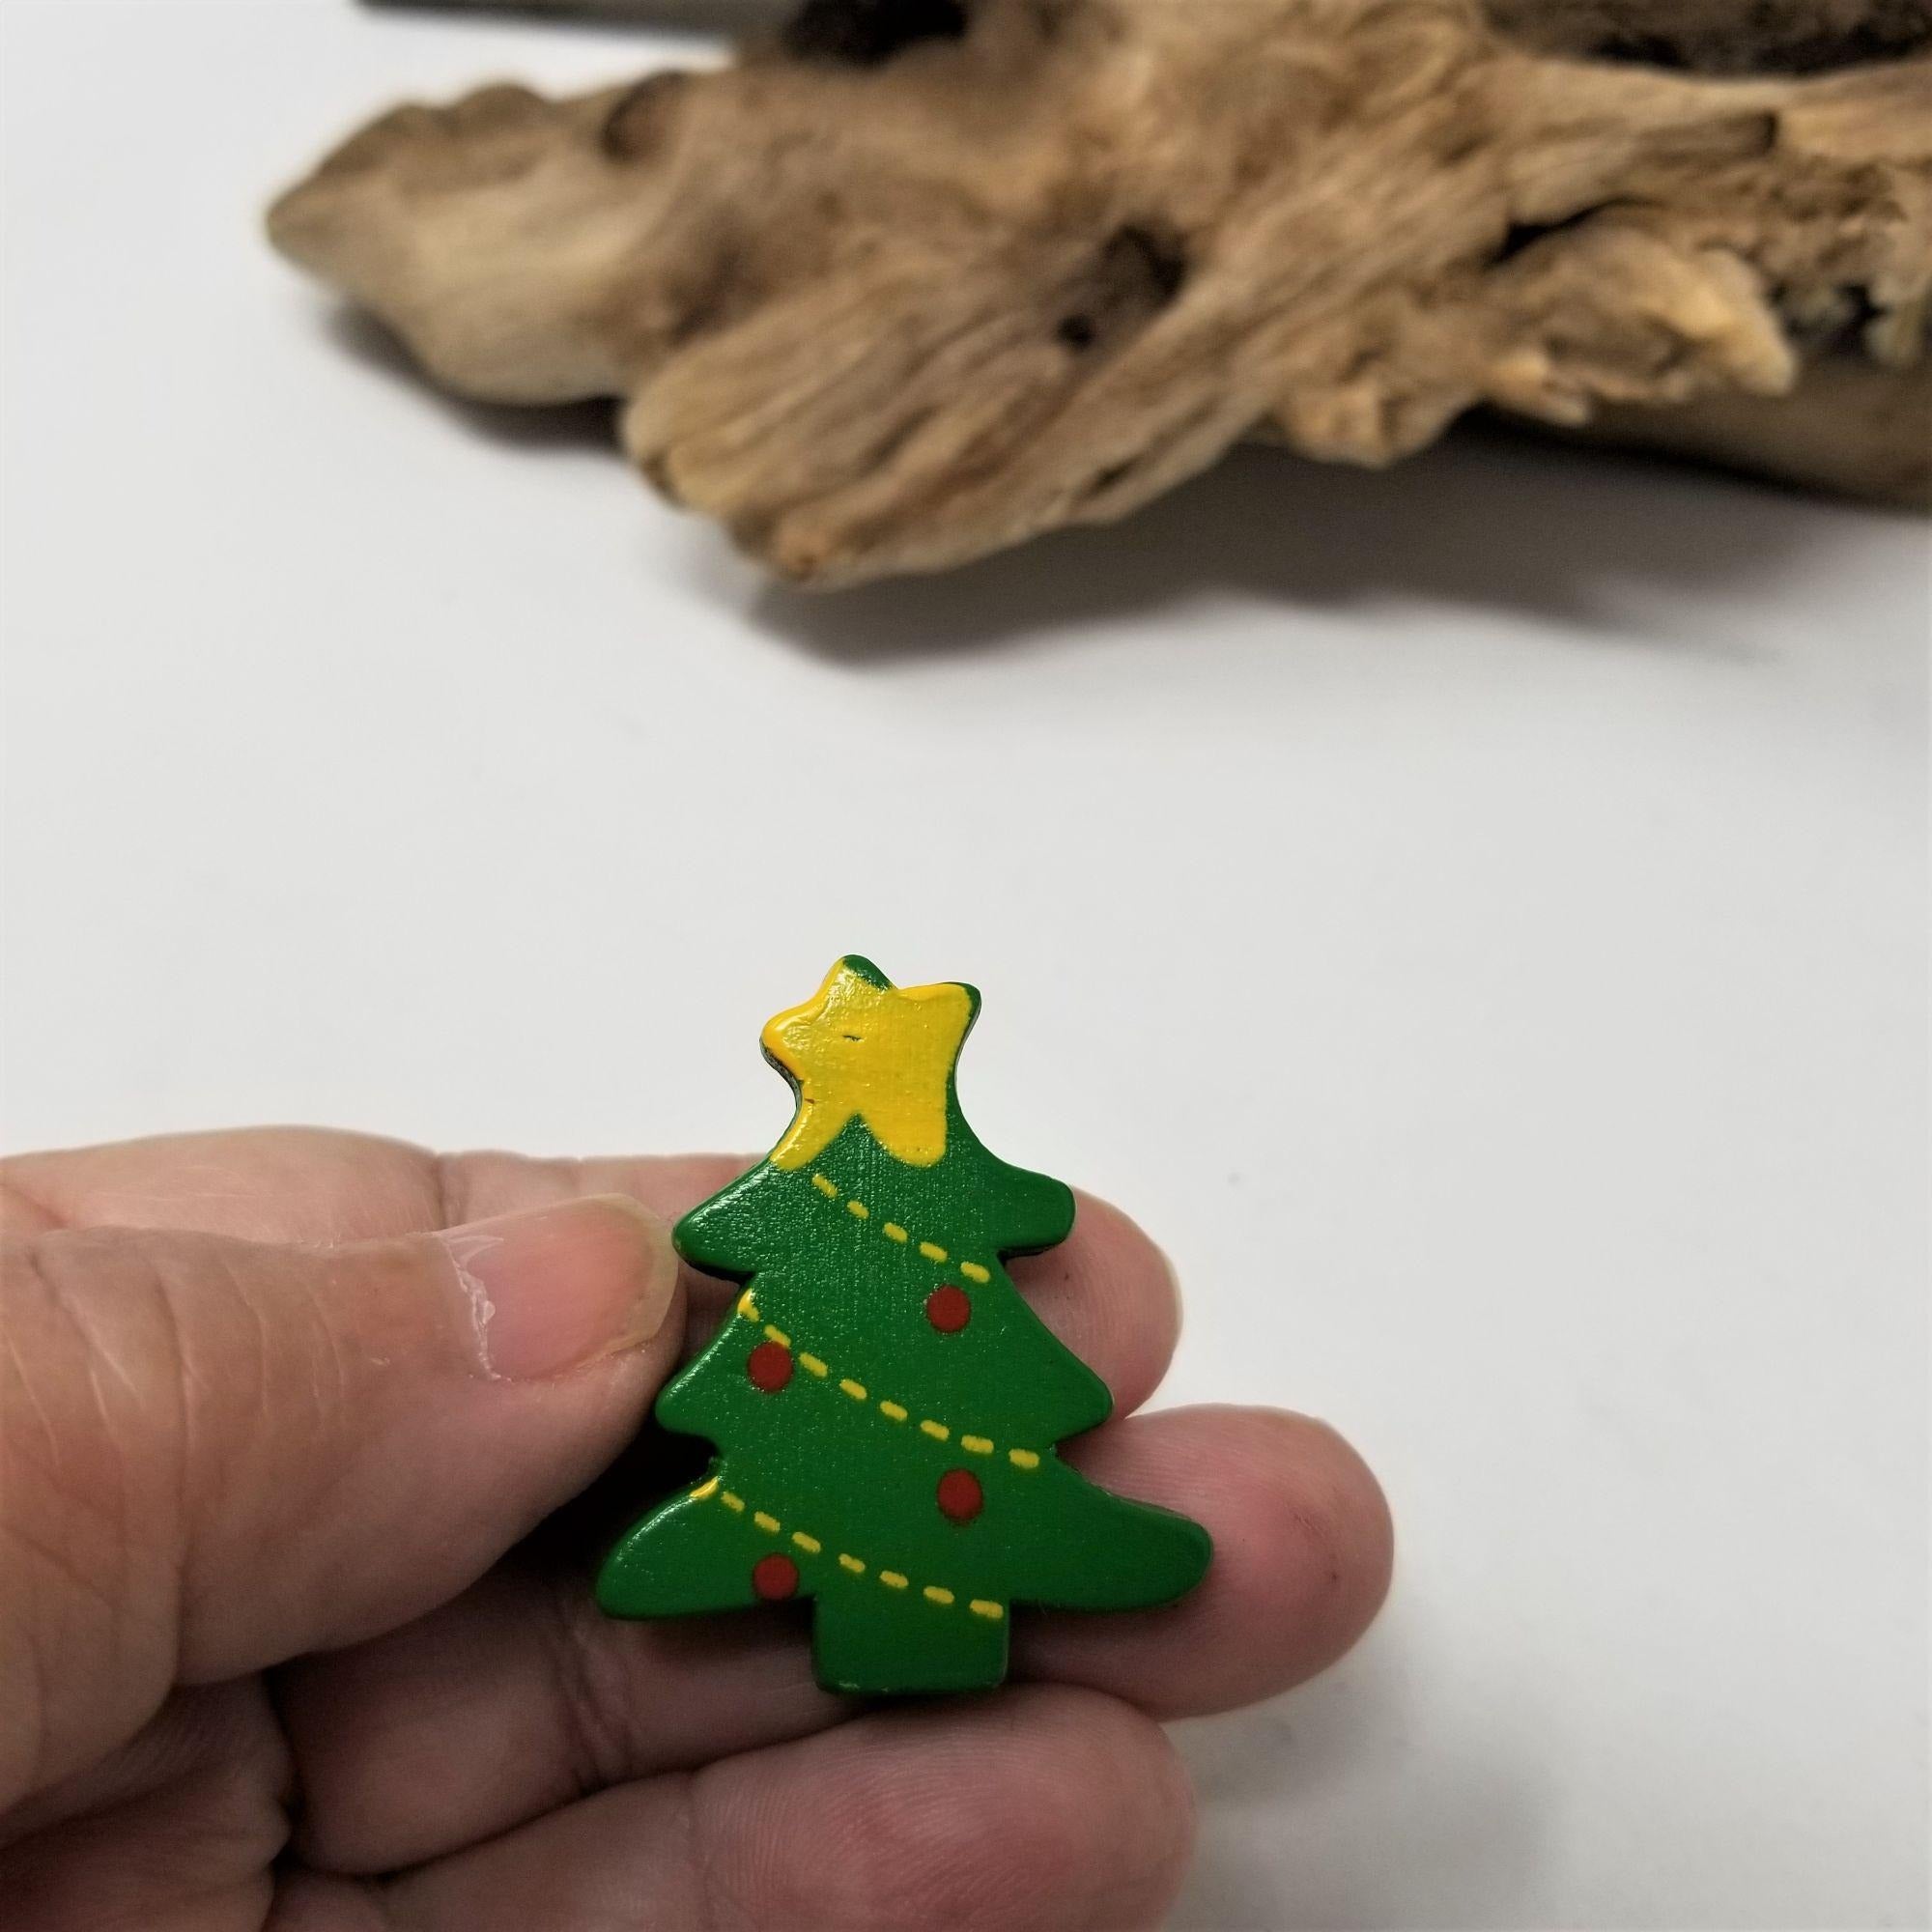 Mom Reindeer & Christmas Tree Holiday Pins Brooches